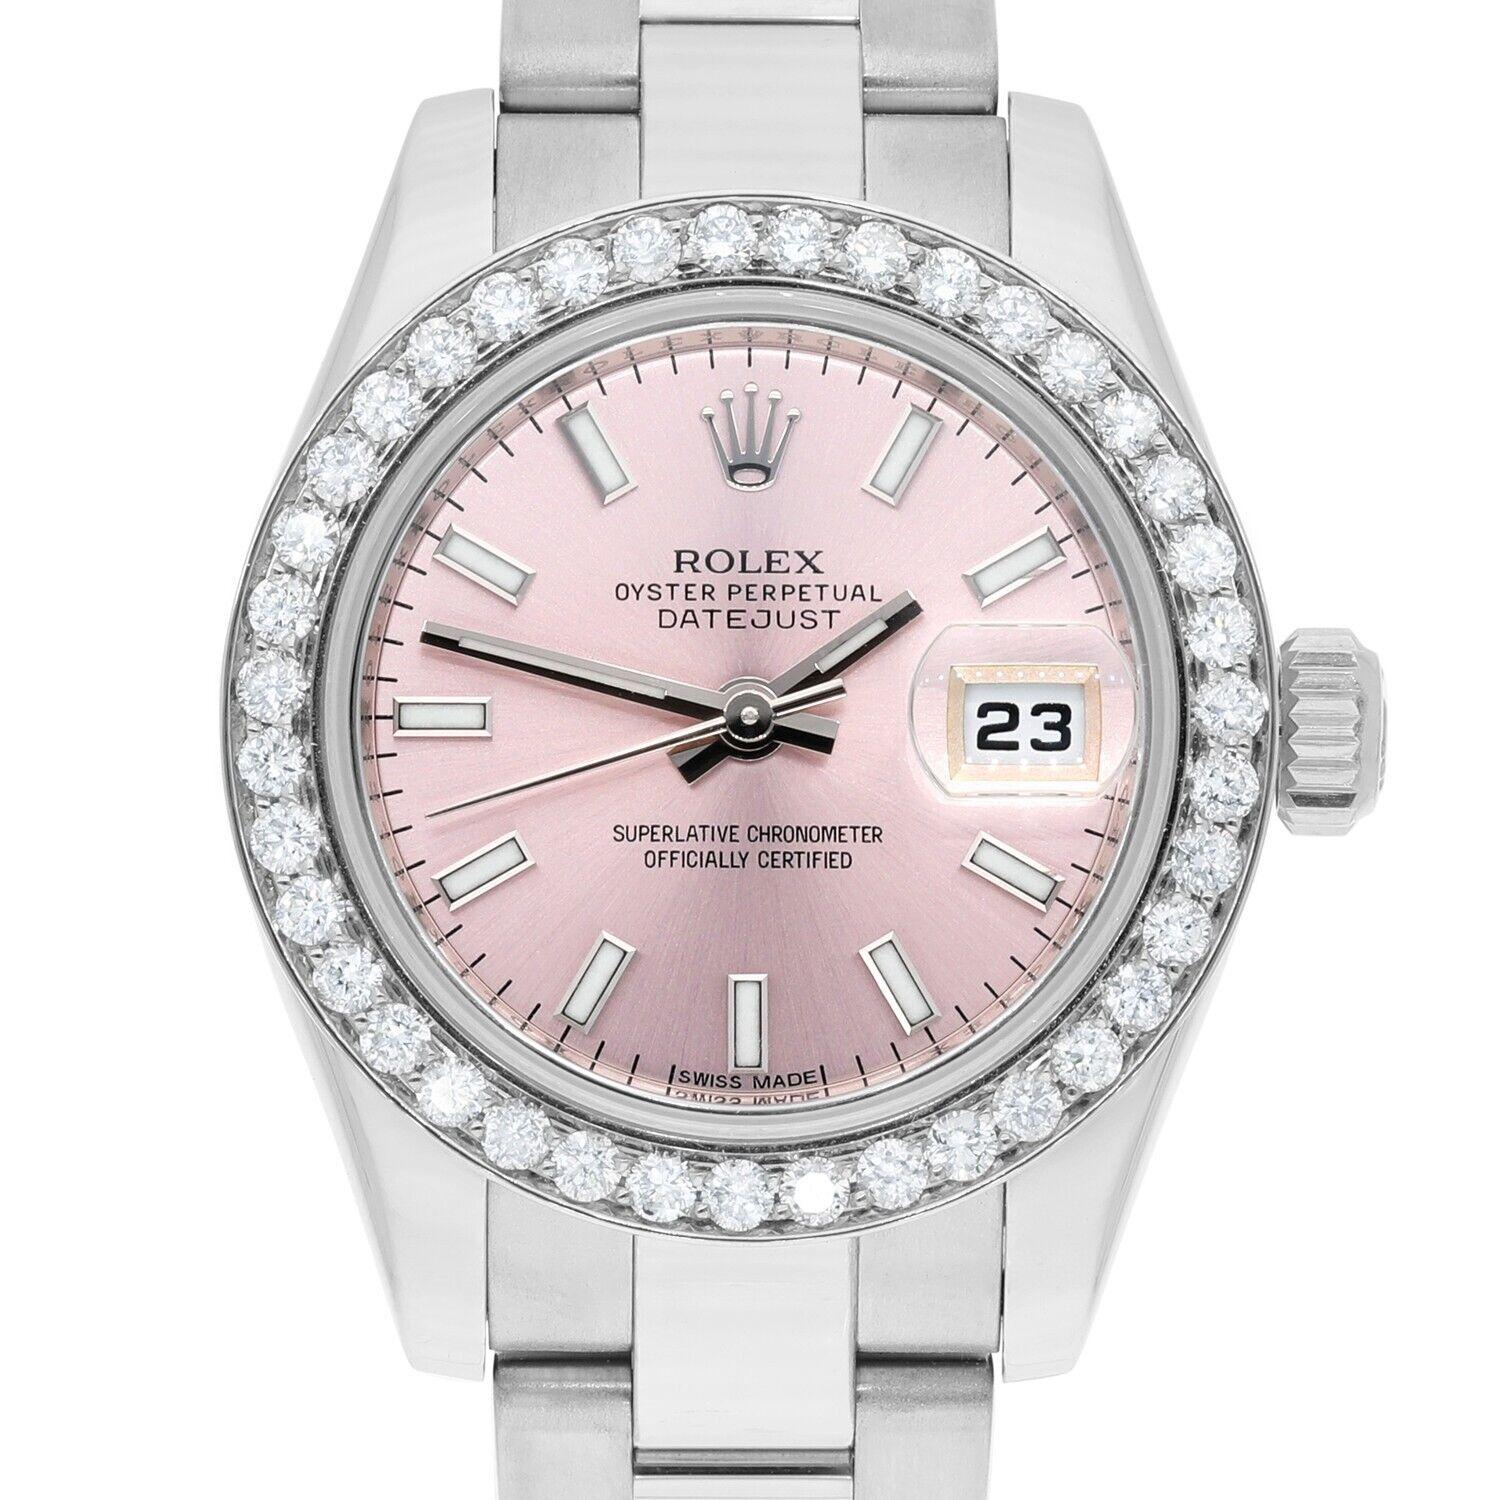 Brand: Rolex
Series: Datejust
Model: 179160
Case Diameter: 26 mm
Bracelet: Oyster band; stainless steel
Bezel: Custom diamond set
Dial: Pink Index
Carat Weight: 1.20 carats in total diamond weight
The sale includes a jewelry watch box and an